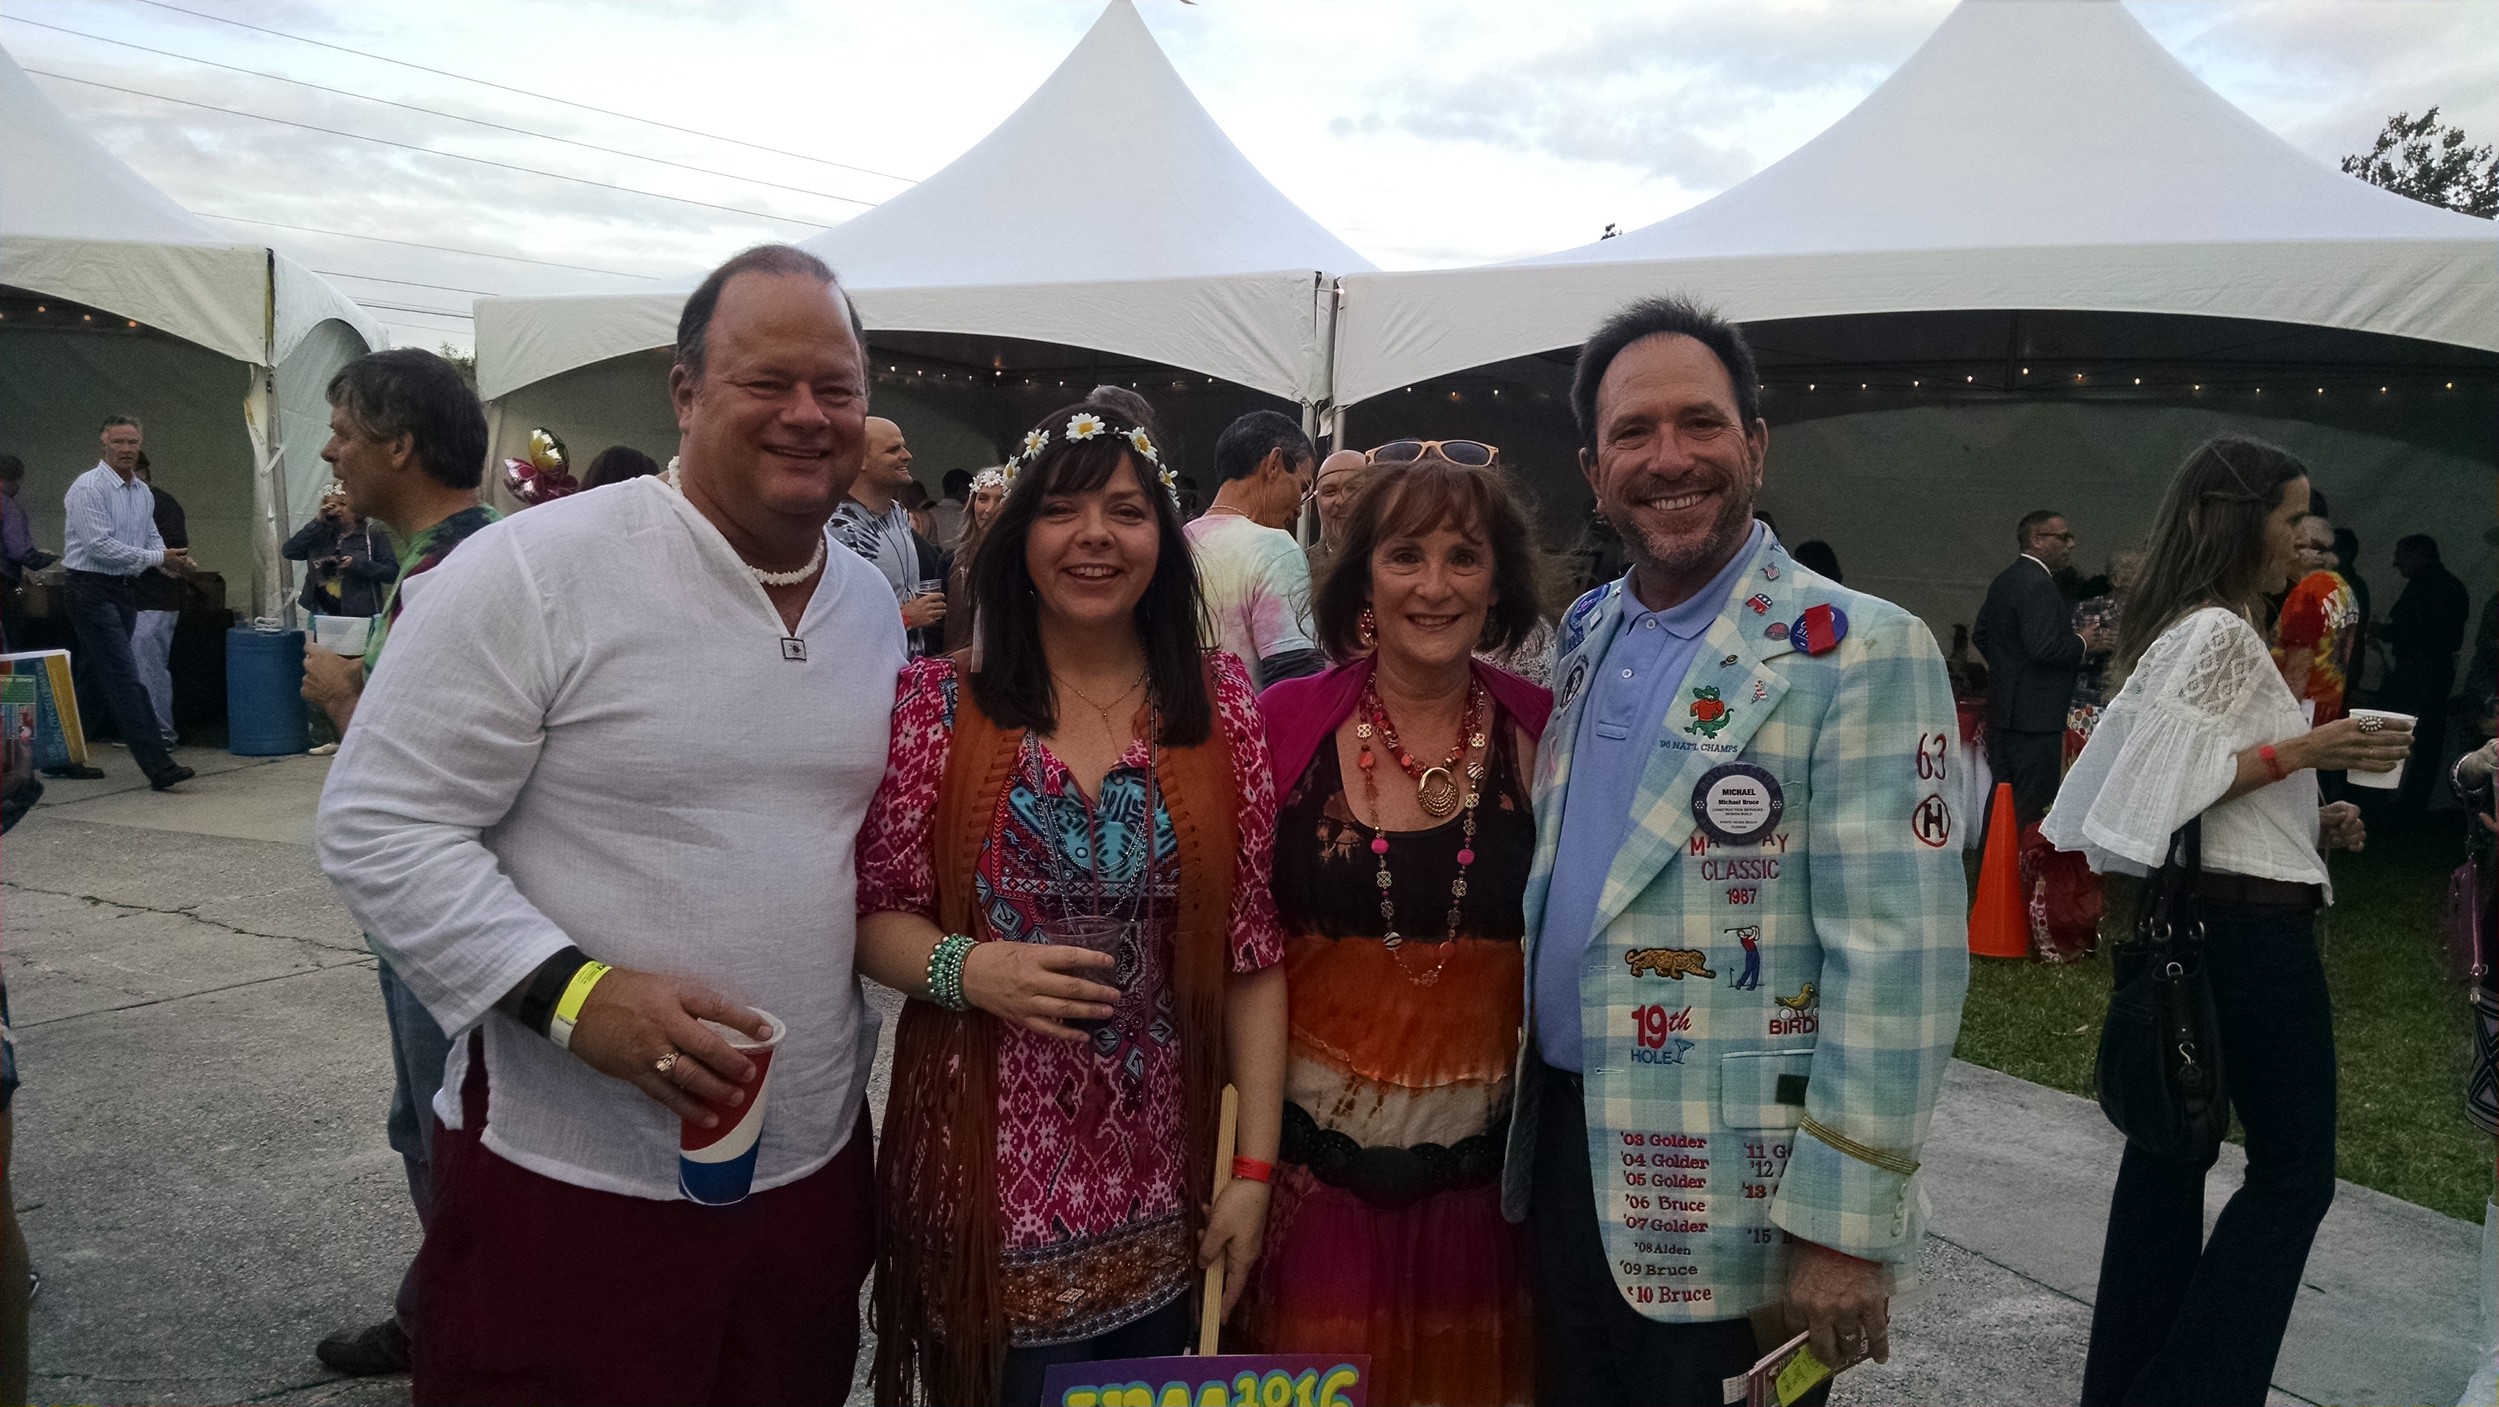 Jacksonville Beach Mayor Charlie Latham and wife Kathryn with husband and wife Rebecca Bruce and Michael Bruce, Mineral City Celebration event chair.